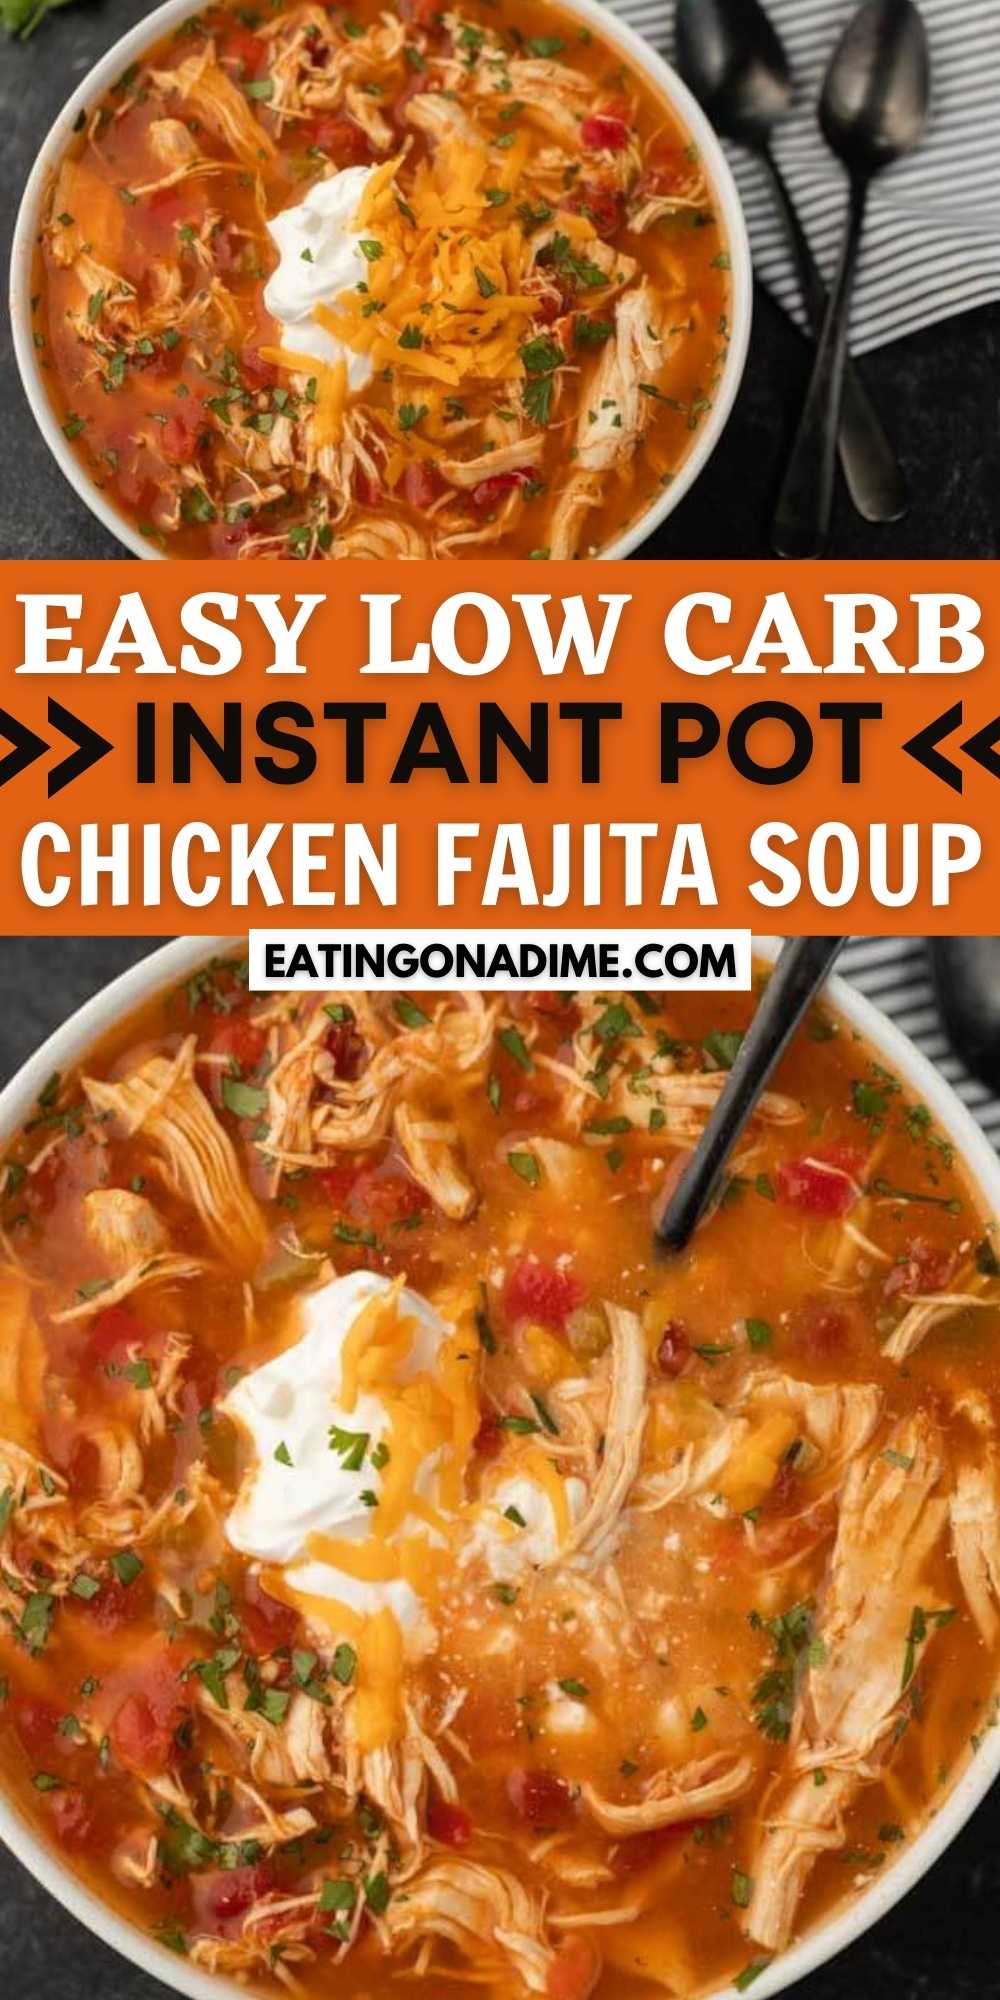 This Instant Pot Chicken Fajita Soup is quick, easy, low carb and keto friendly too. It is full of flavor and a great meal anytime of the year! Everyone loves this healthy pressure cooker chicken fajita soup.  It’s the best skinny chicken fajita soup recipe! #eatingonadime #instantpotrecipes #souprecipes #chickenrecipes 
